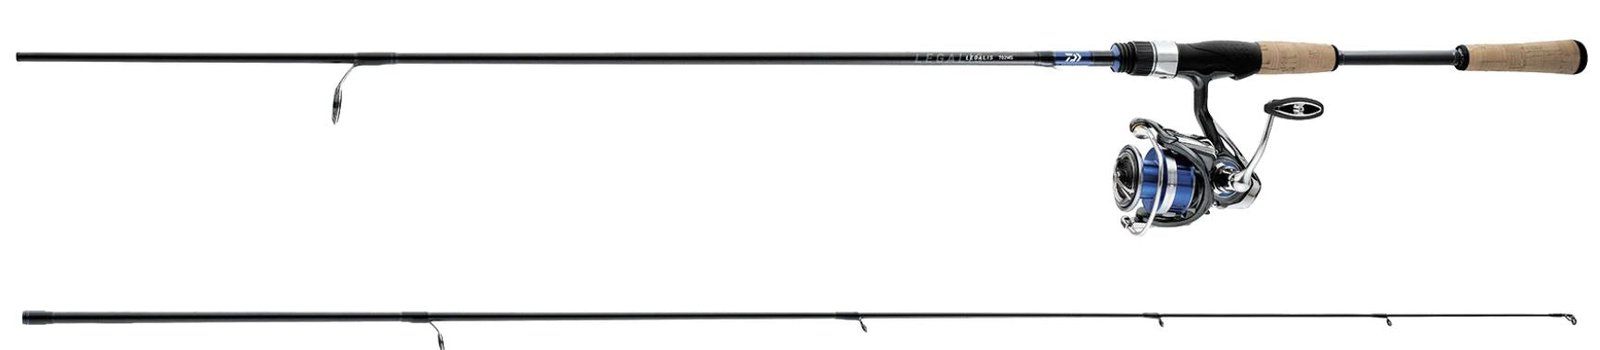 Daiwa Legalis LT Spinning Combo - Lake Erie Bait and Tackle